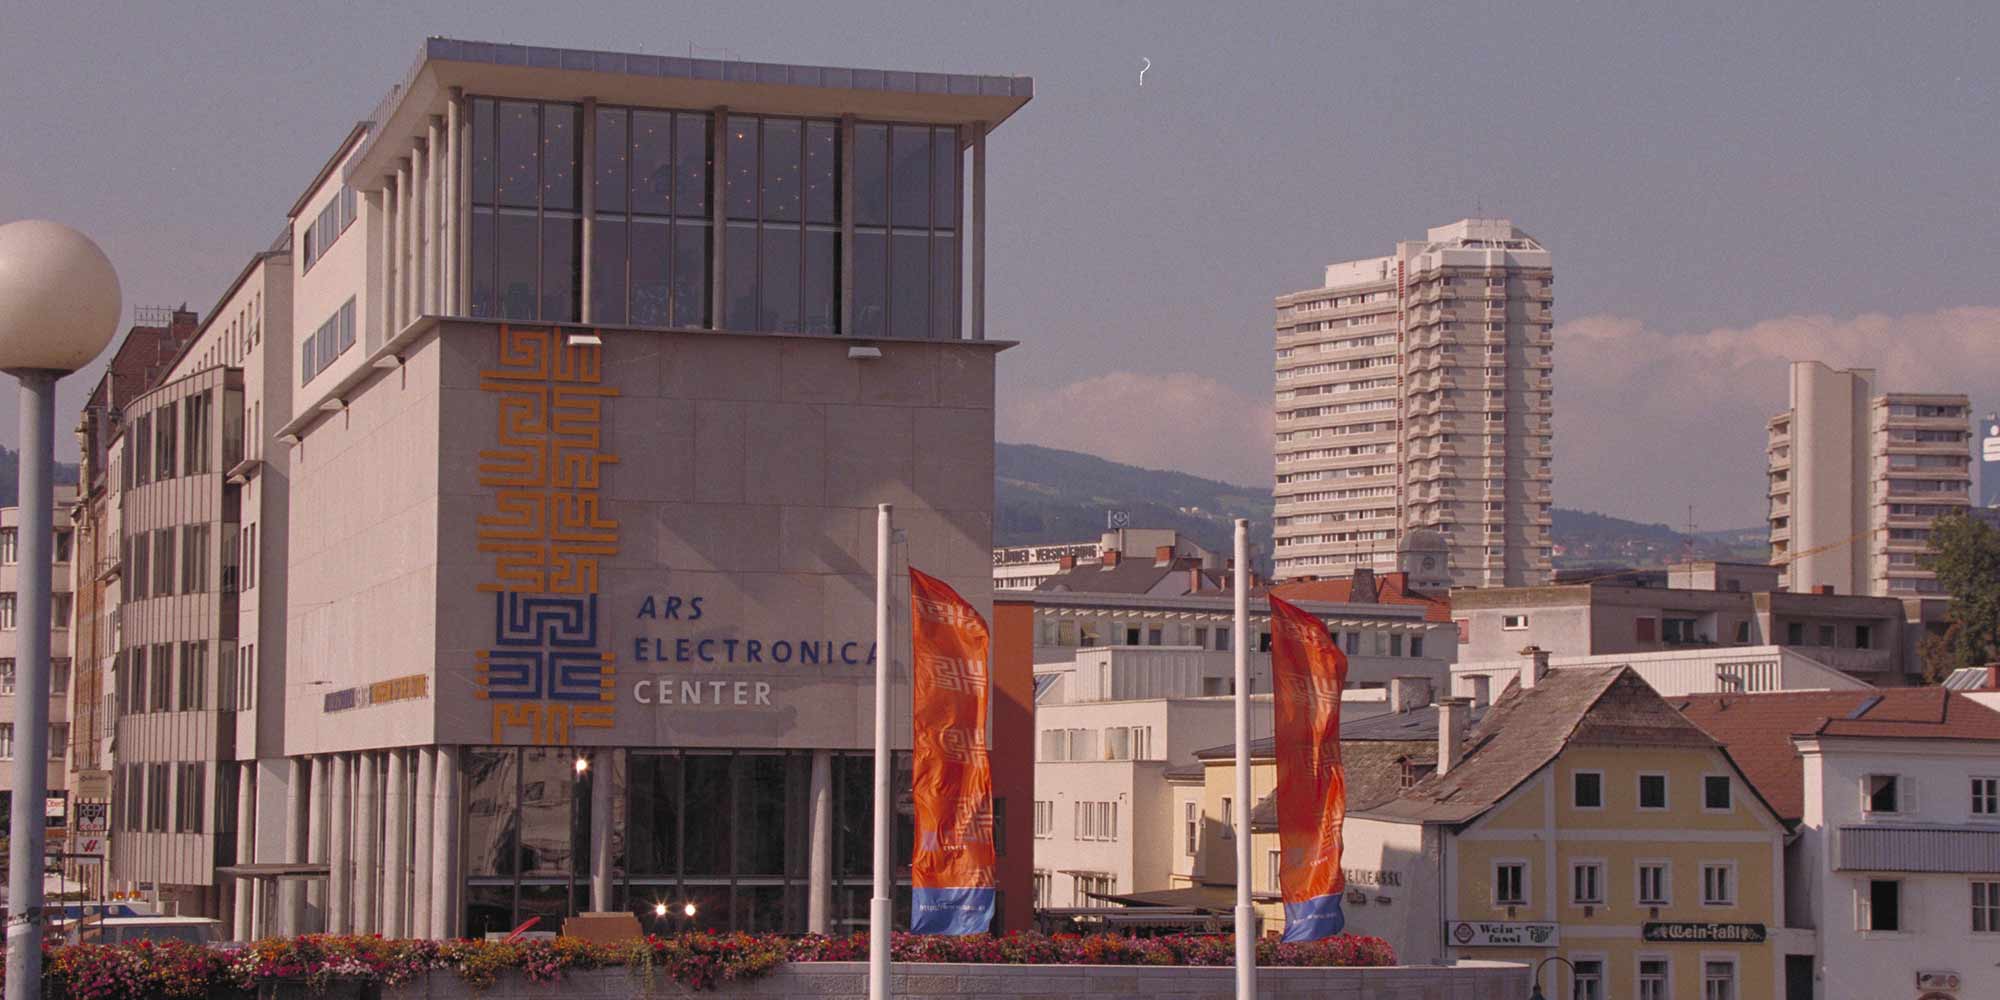 Ars Electronica Center in 1996